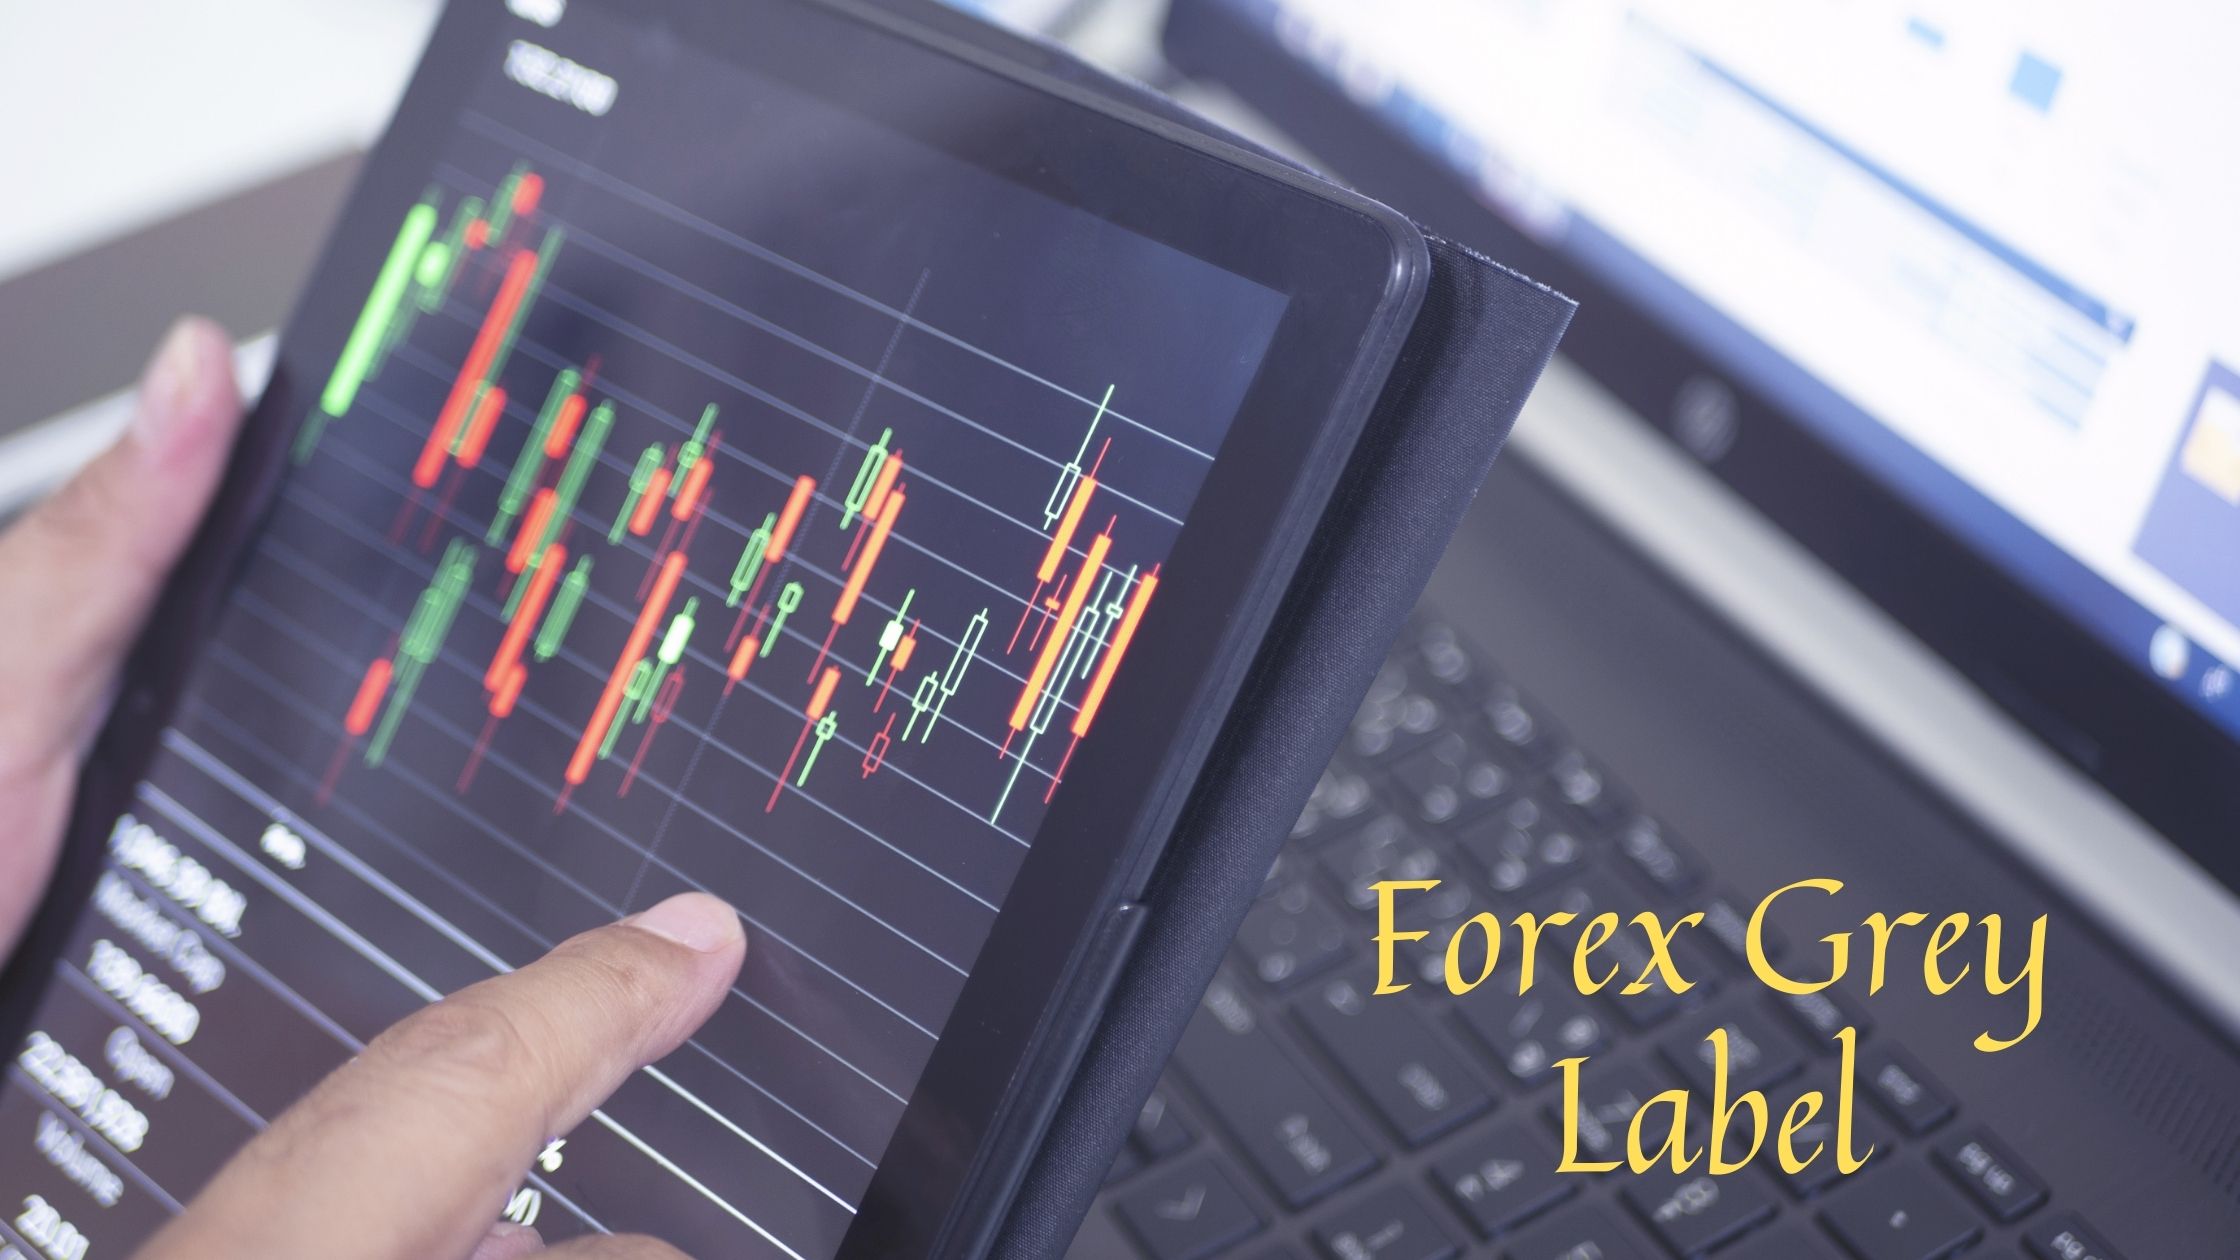 Forex Grey Labe Solution